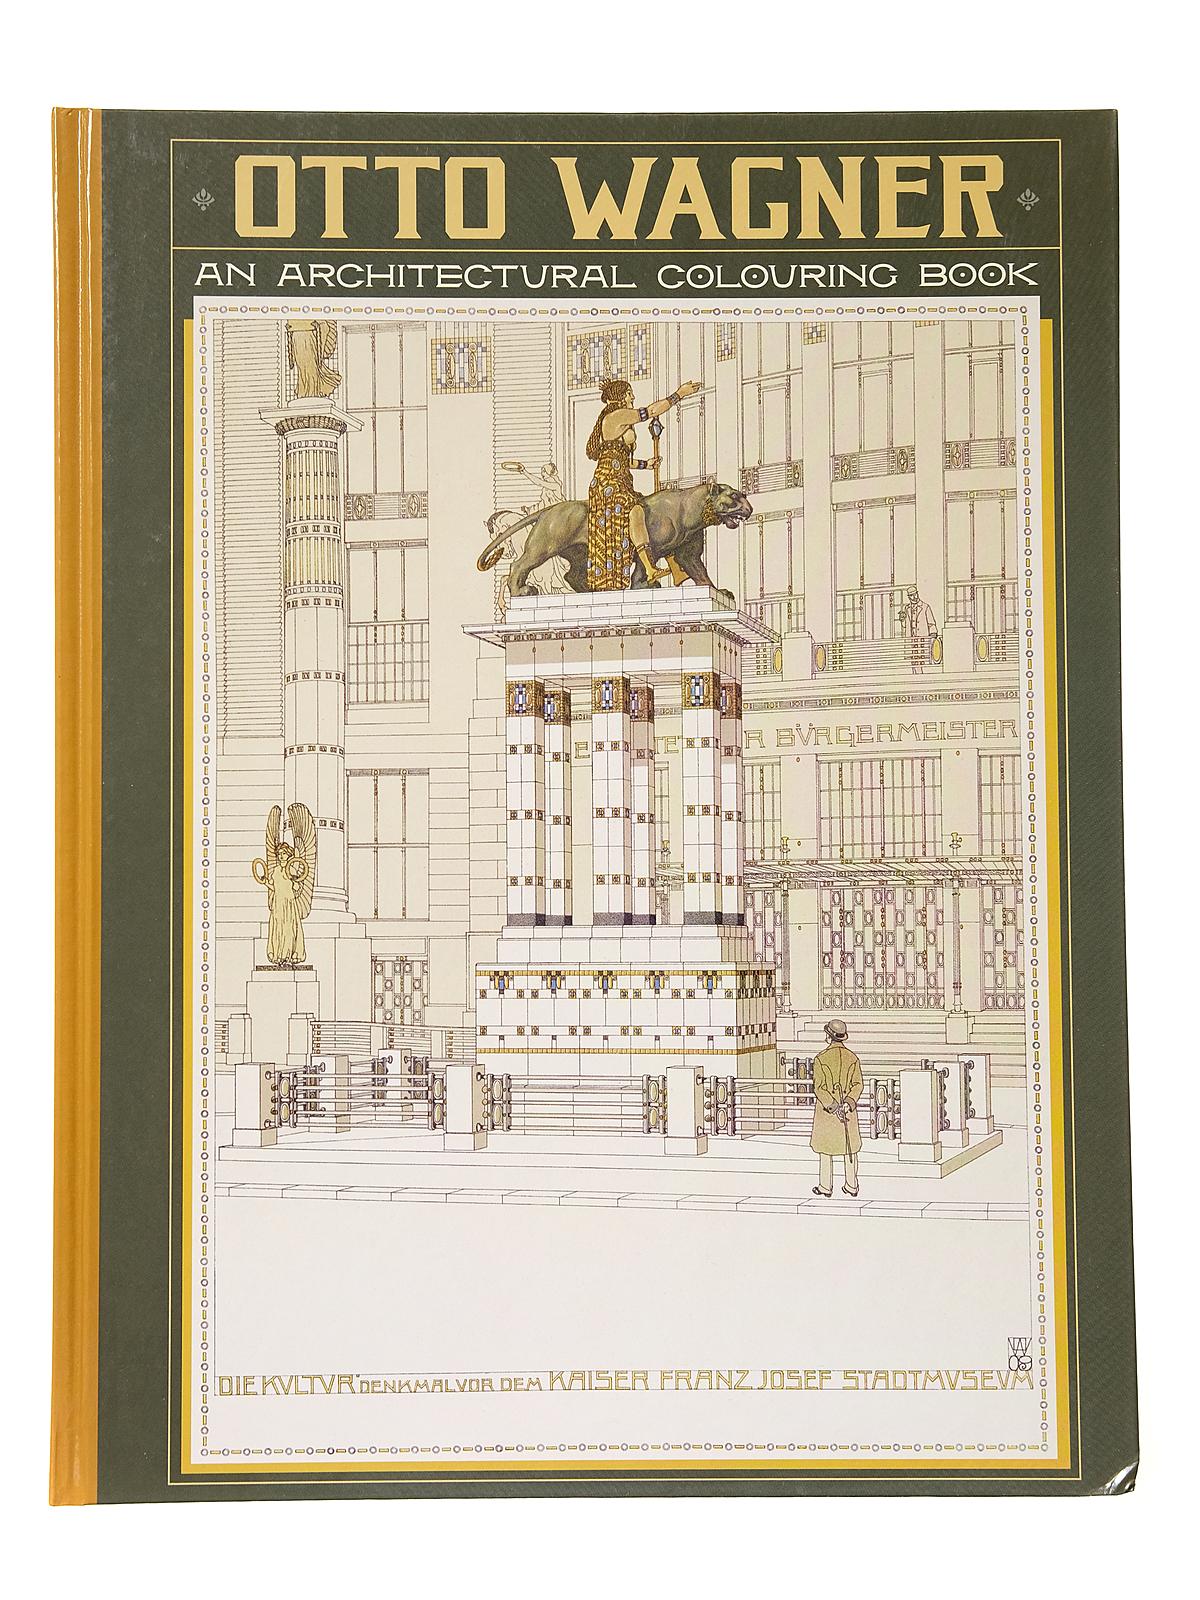 Coloring Books Otto Wagner